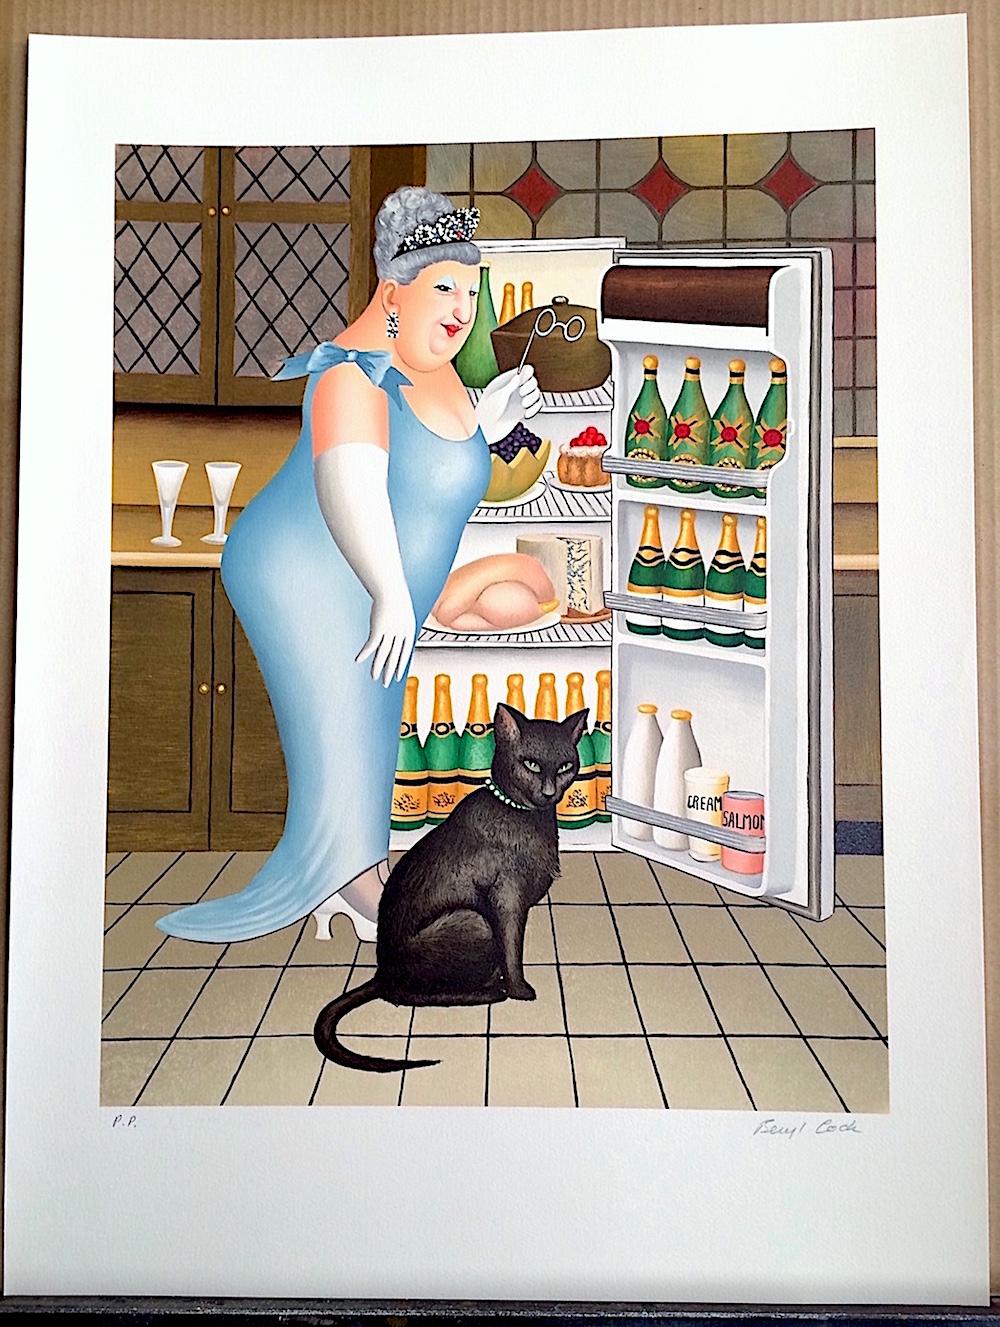 PERCY AT THE FRIDGE Signed Lithograph, Black Cat, Champagne, British Humor - Brown Portrait Print by Beryl Cook